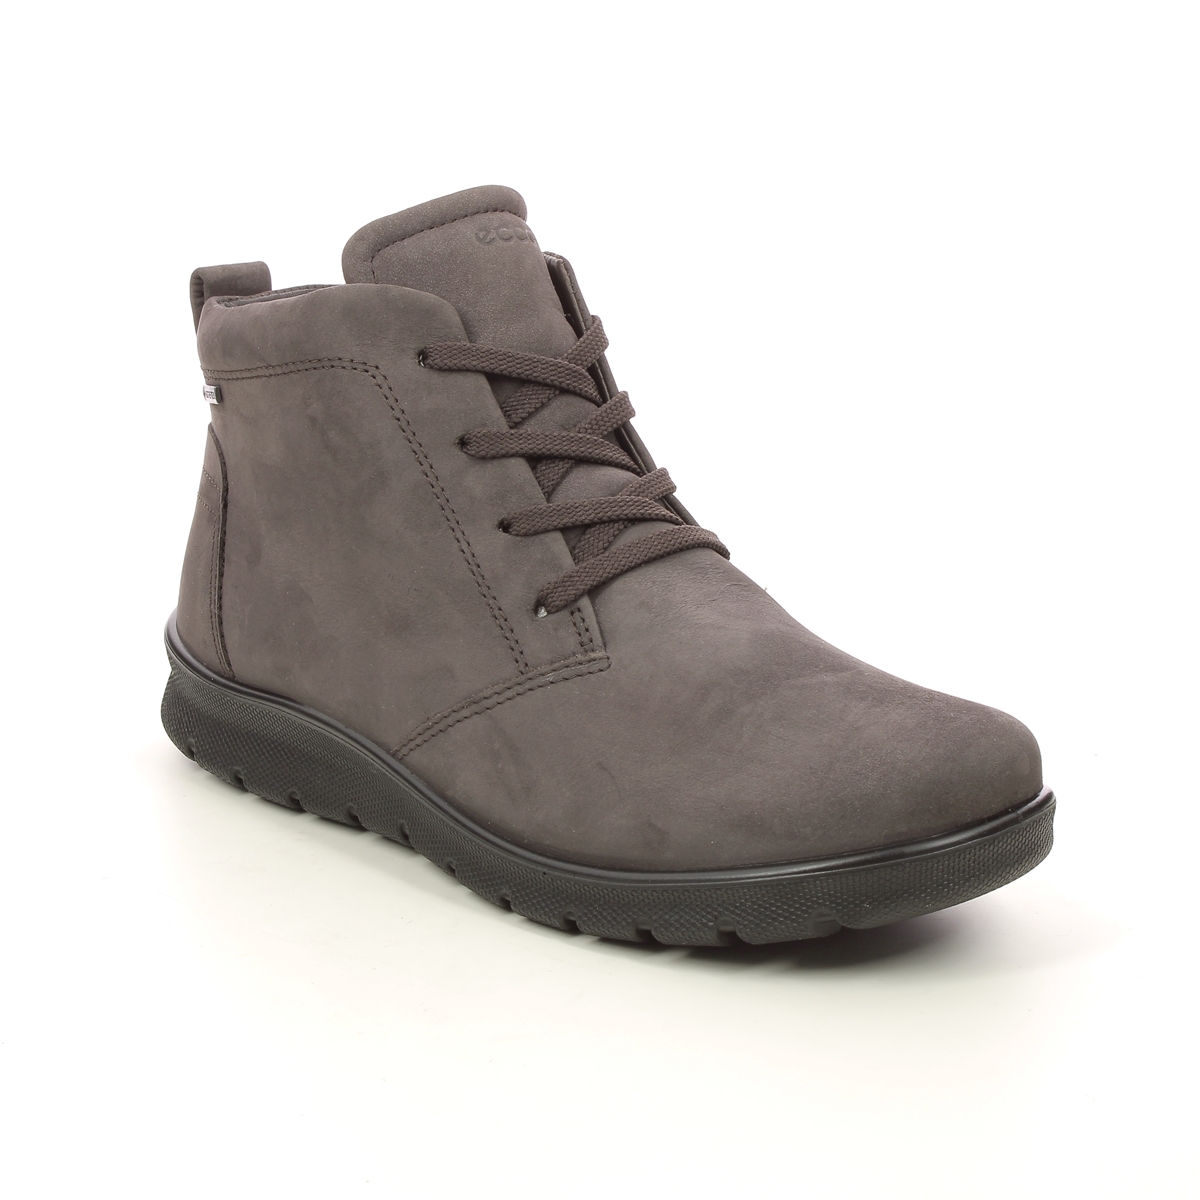 Ecco Babett Lo Gtx Brown Nubuck Womens Lace Up Boots 215583-02576 In Size 39 In Plain Brown Nubuck